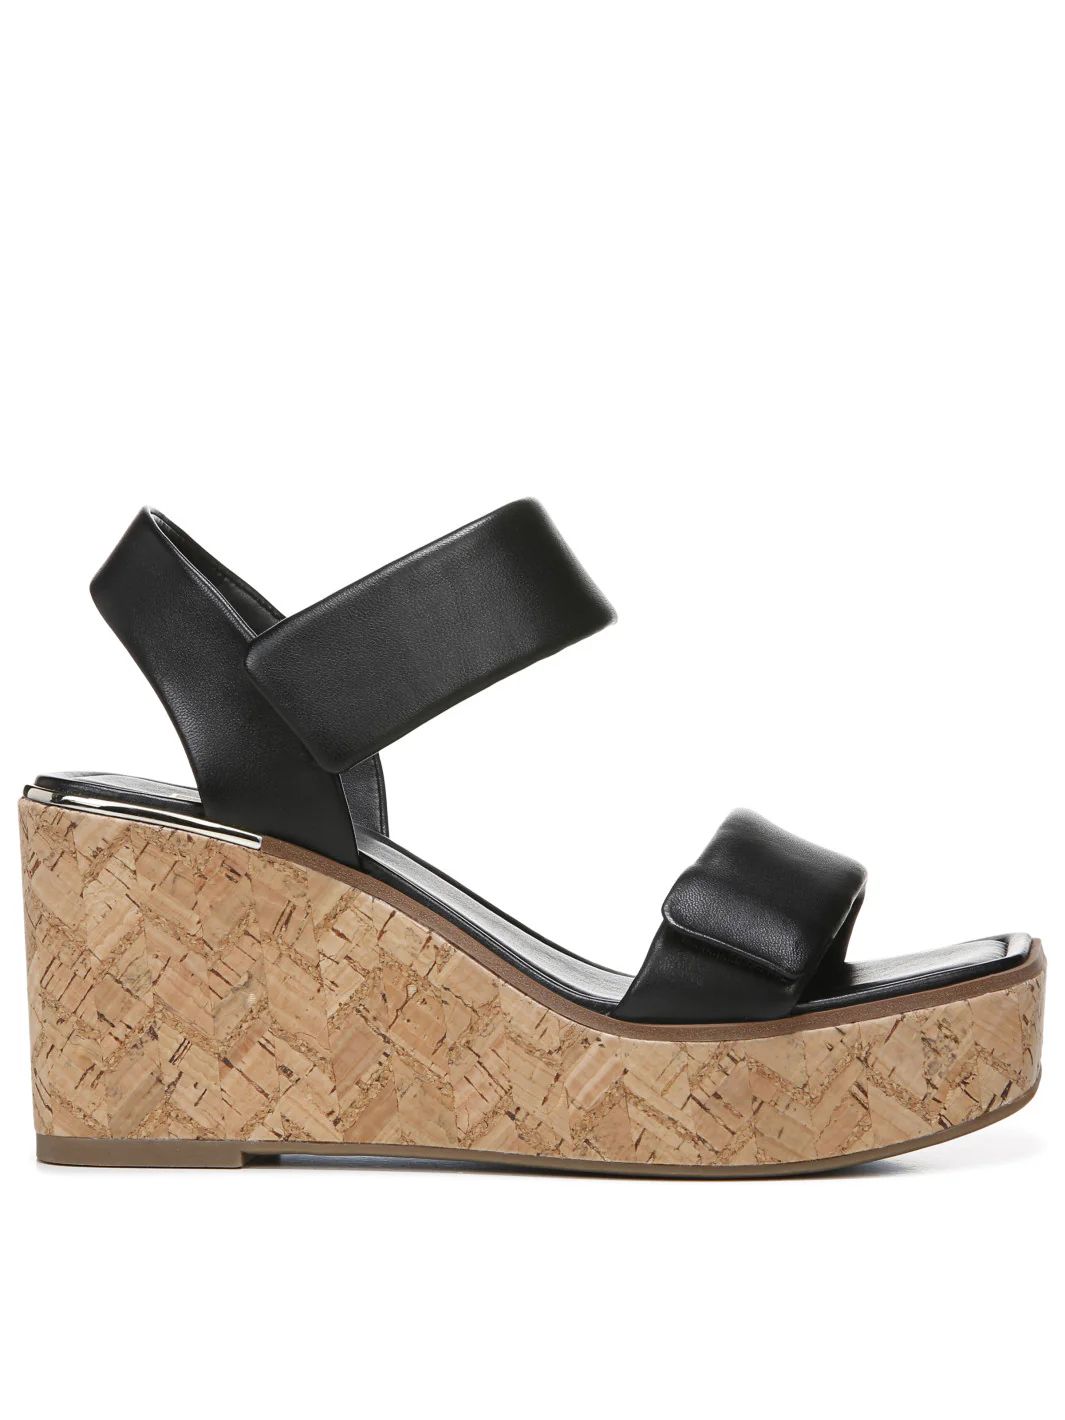 Franco Sarto Women's Sweety Wedge Sandal in Black 8 M Lord & Taylor | Lord & Taylor